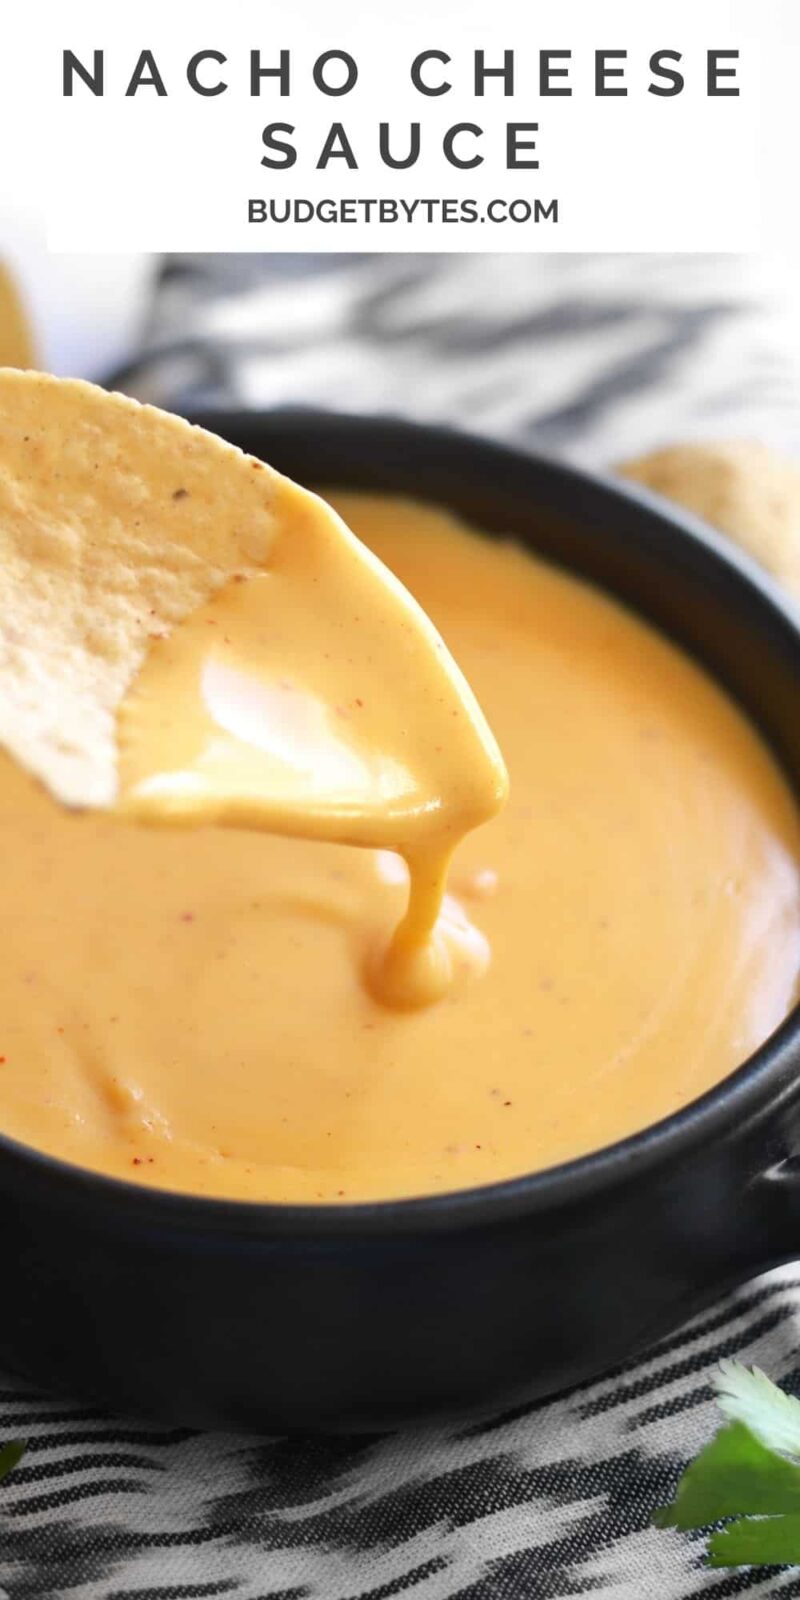 cheese sauce dripping off a chip into a bowl